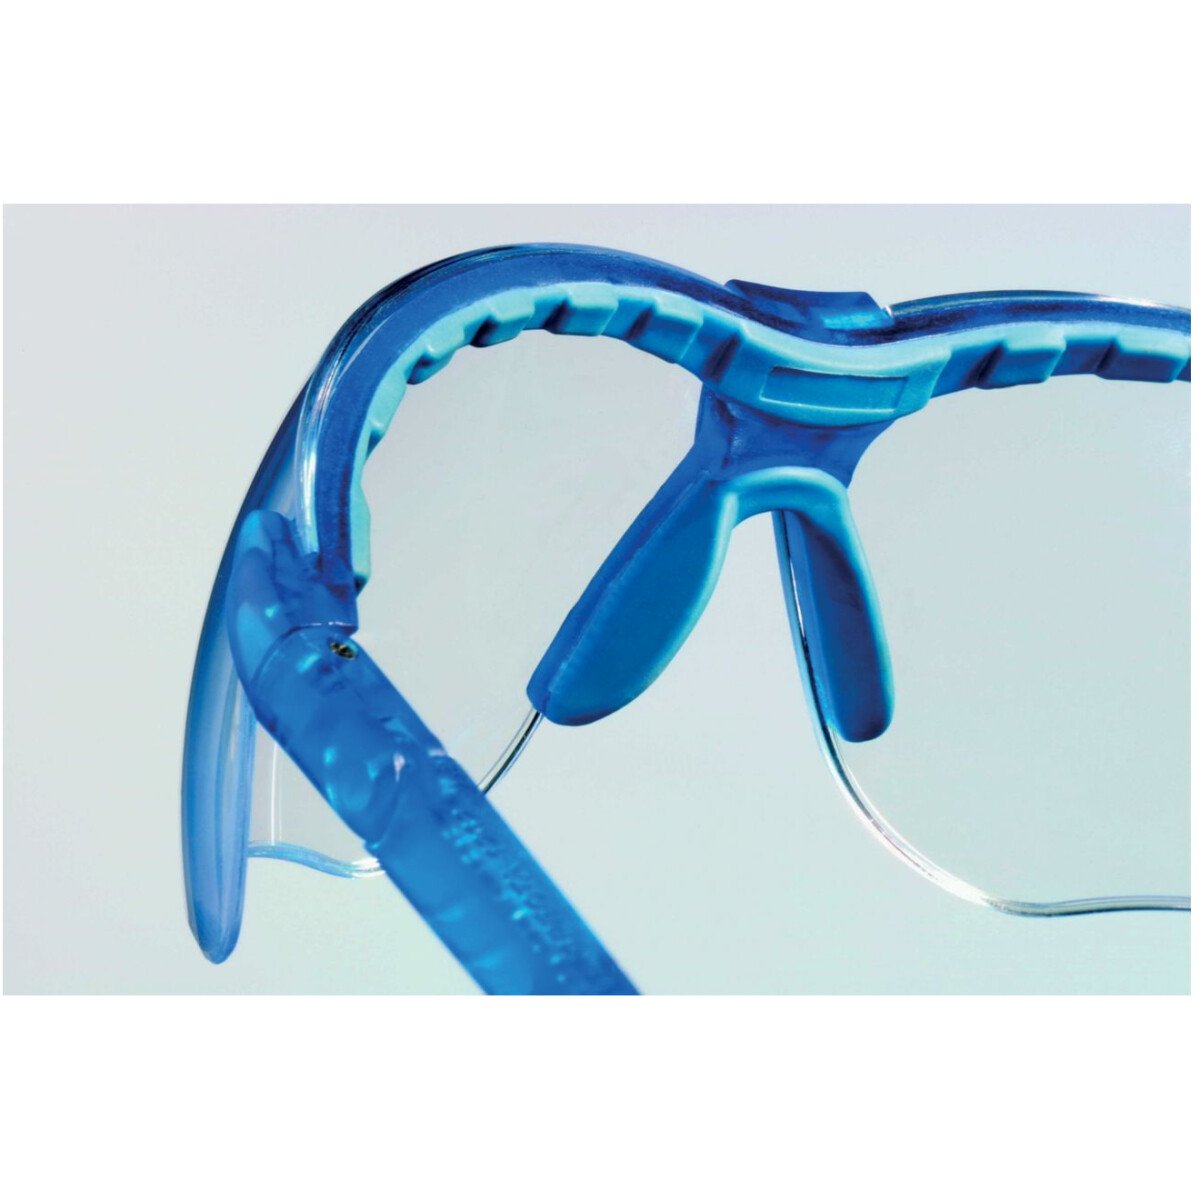 MSA PERSPECTA 010 Antifog Smoke Tinted Lens Safety Spectacles 10045644 ...